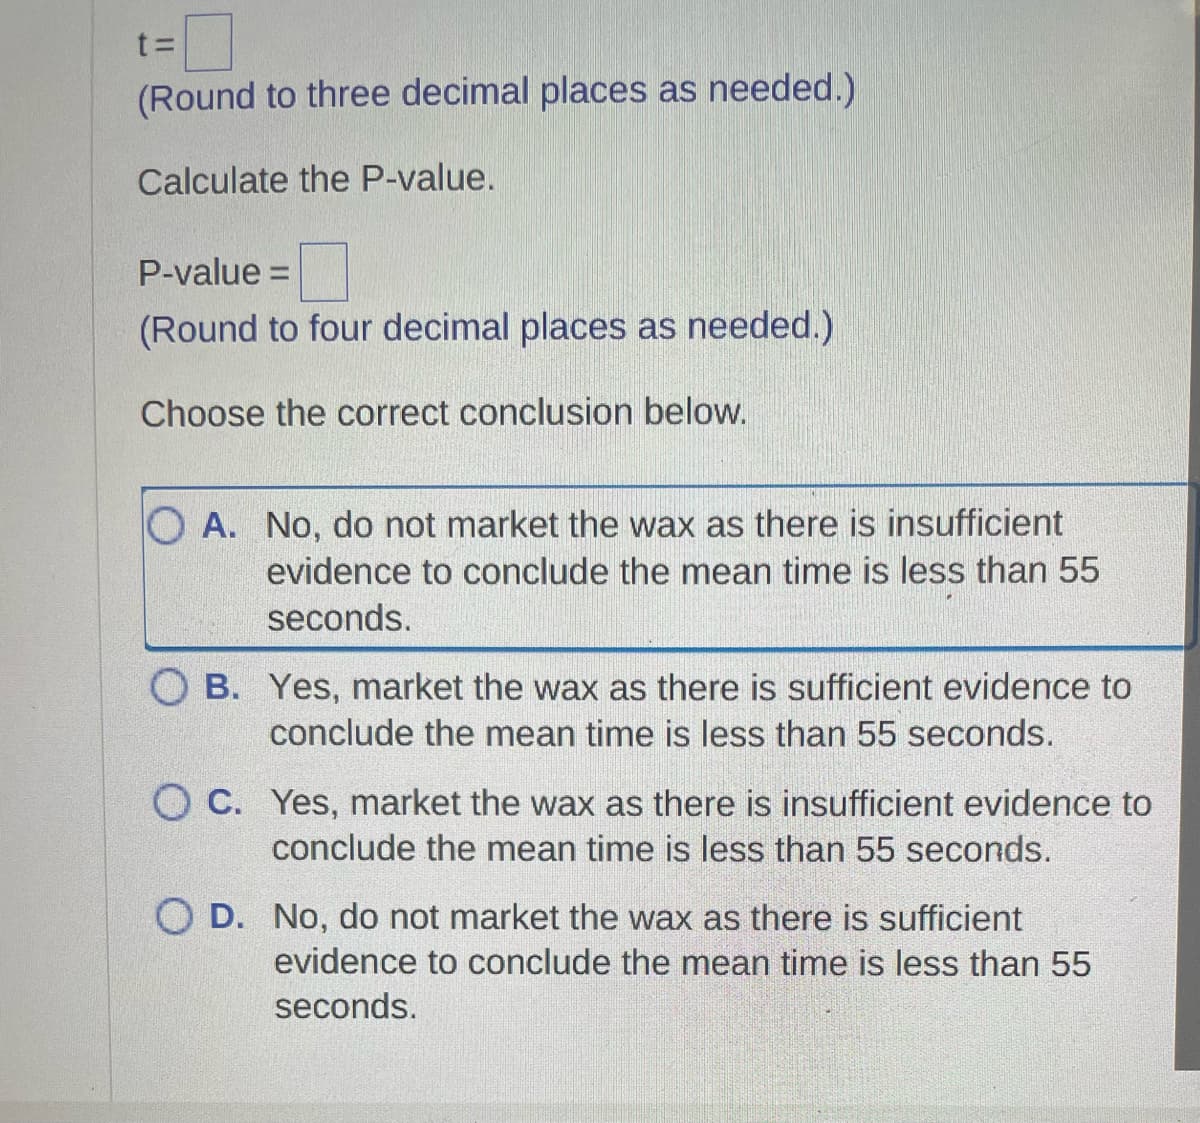 t=
(Round to three decimal places as needed.)
Calculate the P-value.
P-value =
(Round to four decimal places as needed.)
Choose the correct conclusion below.
OA. No, do not market the wax as there is insufficient
evidence to conclude the mean time is less than 55
seconds.
OB. Yes, market the wax as there is sufficient evidence to
conclude the mean time is less than 55 seconds.
OC. Yes, market the wax as there is insufficient evidence to
conclude the mean time is less than 55 seconds.
O D. No, do not market the wax as there is sufficient
evidence to conclude the mean time is less than 55
seconds.